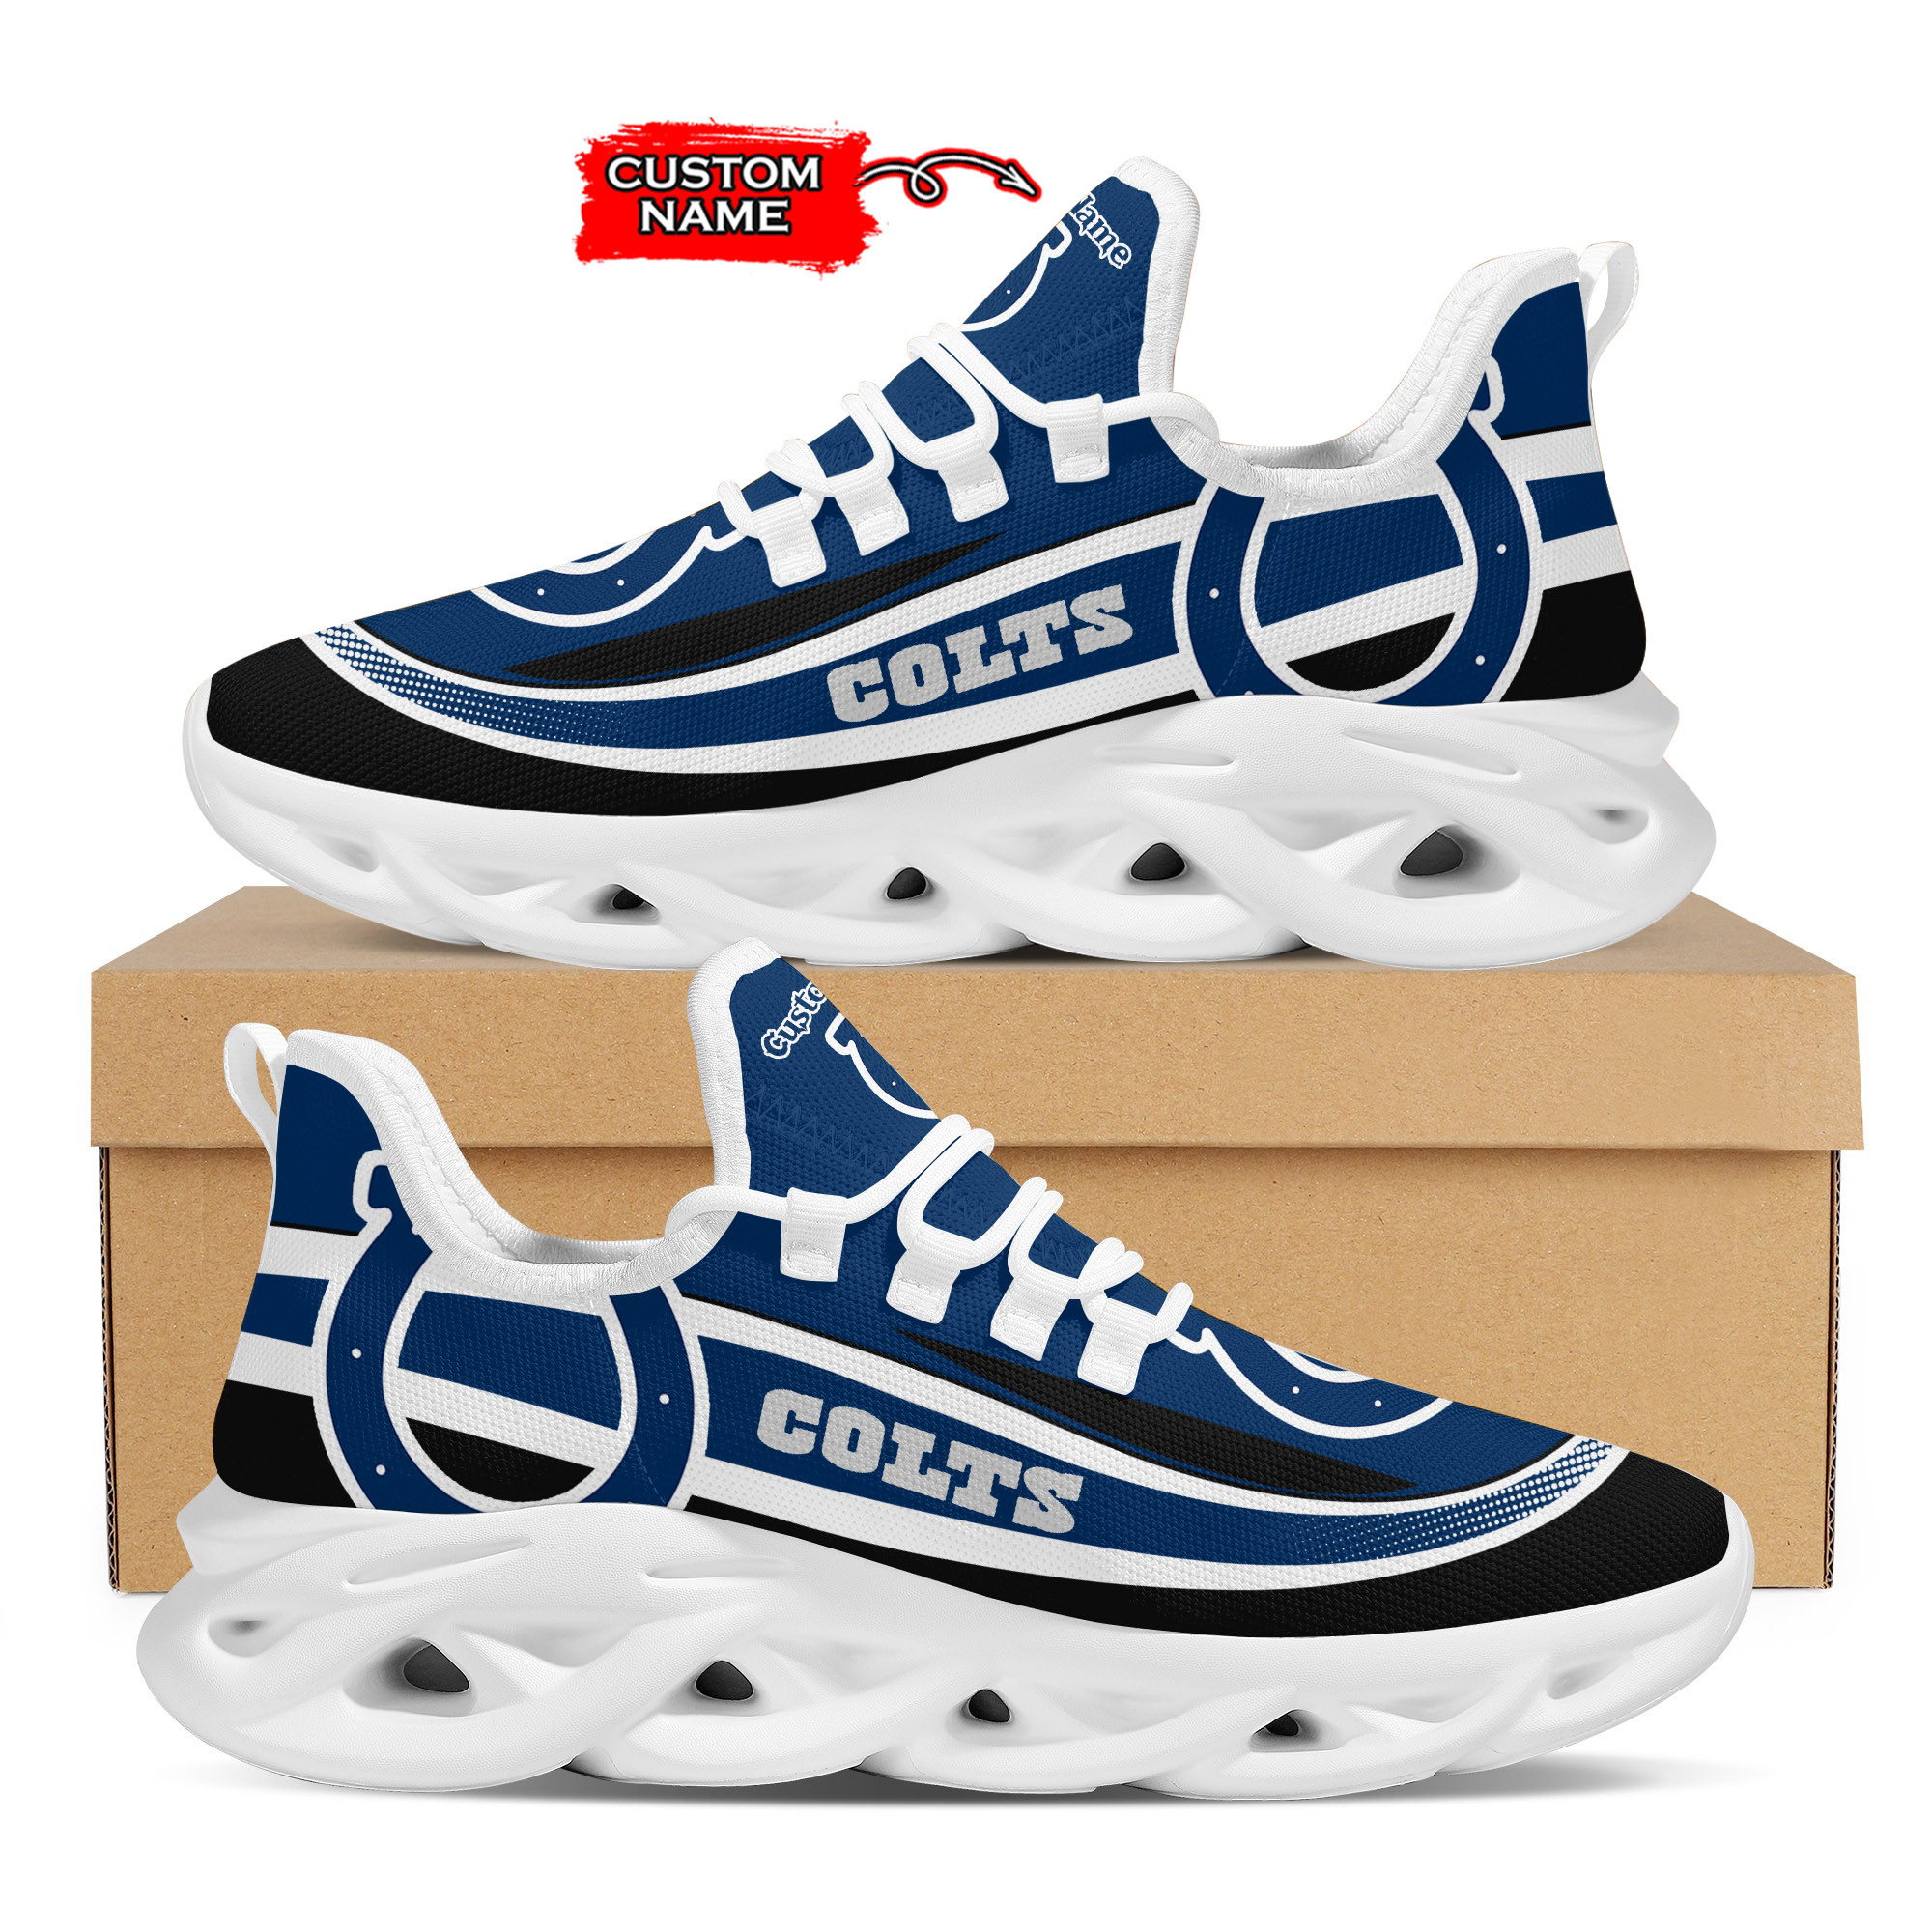 Indianapolis Colts Nfl Custom Name Clunky Max Soul Shoes Sneakers For Mens Womens Personalized Gifts – Hothot